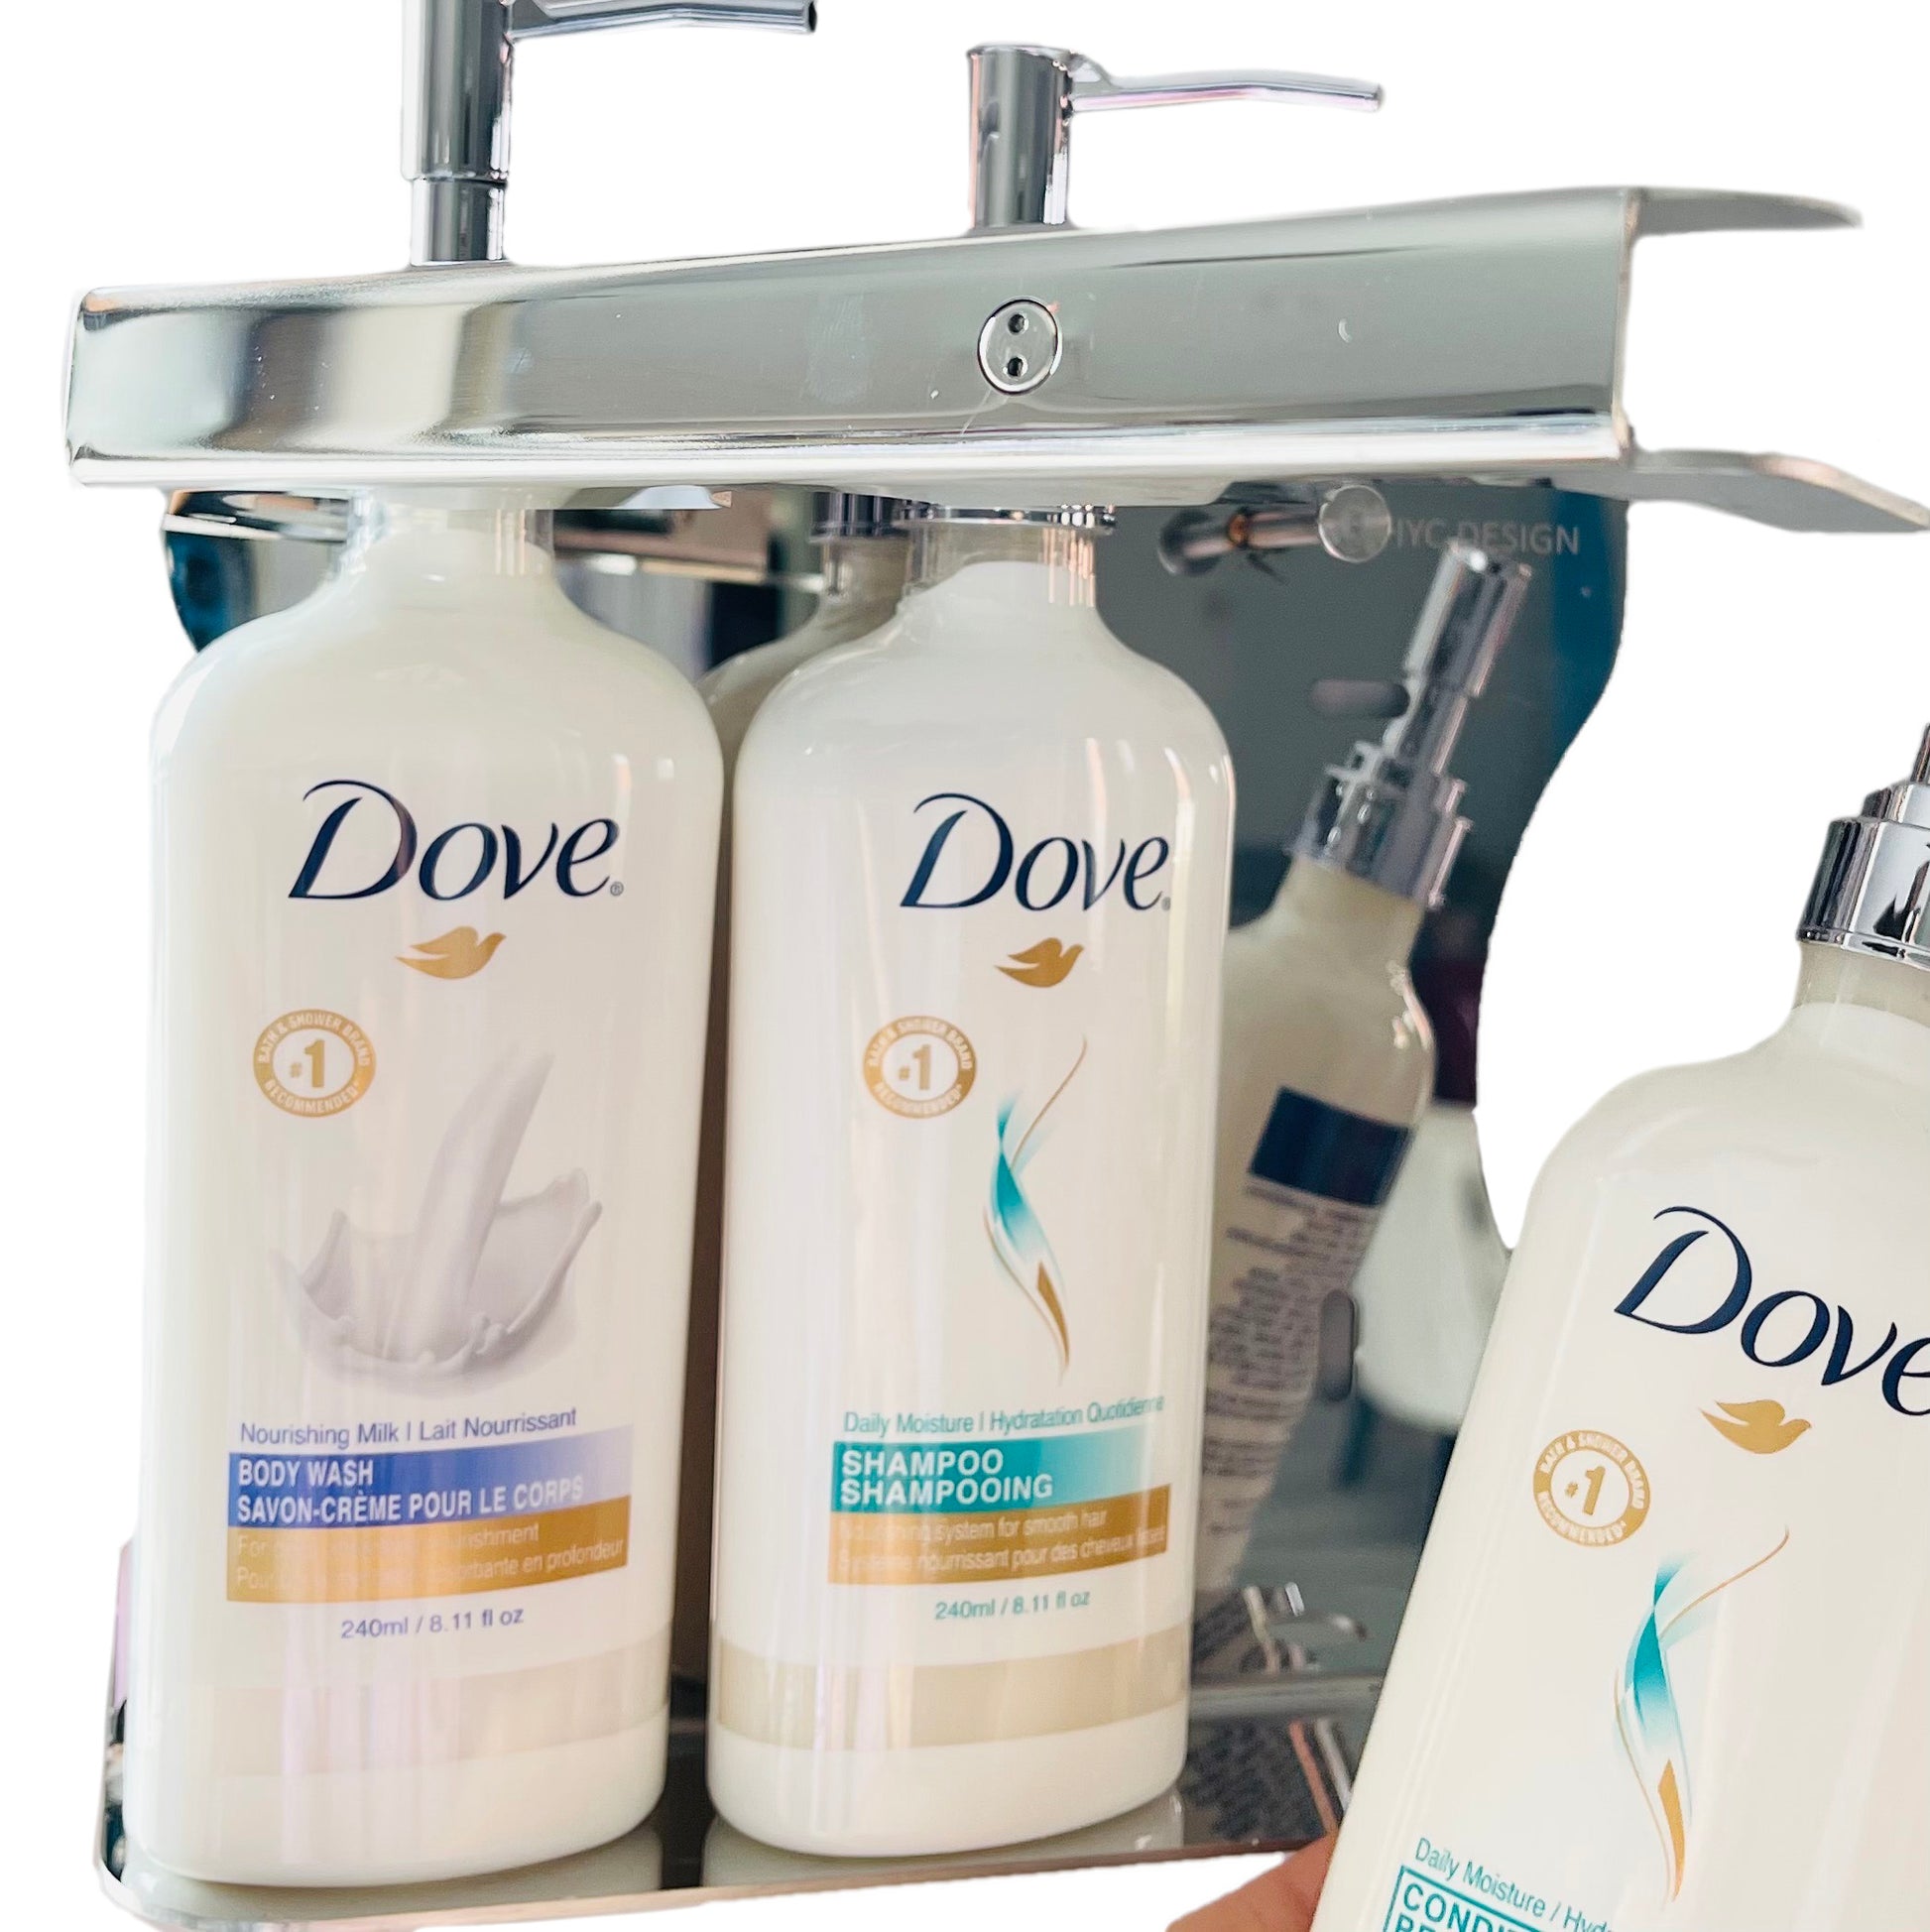 Dove body wash, conditioner and shampoo in a liquid amenities holder